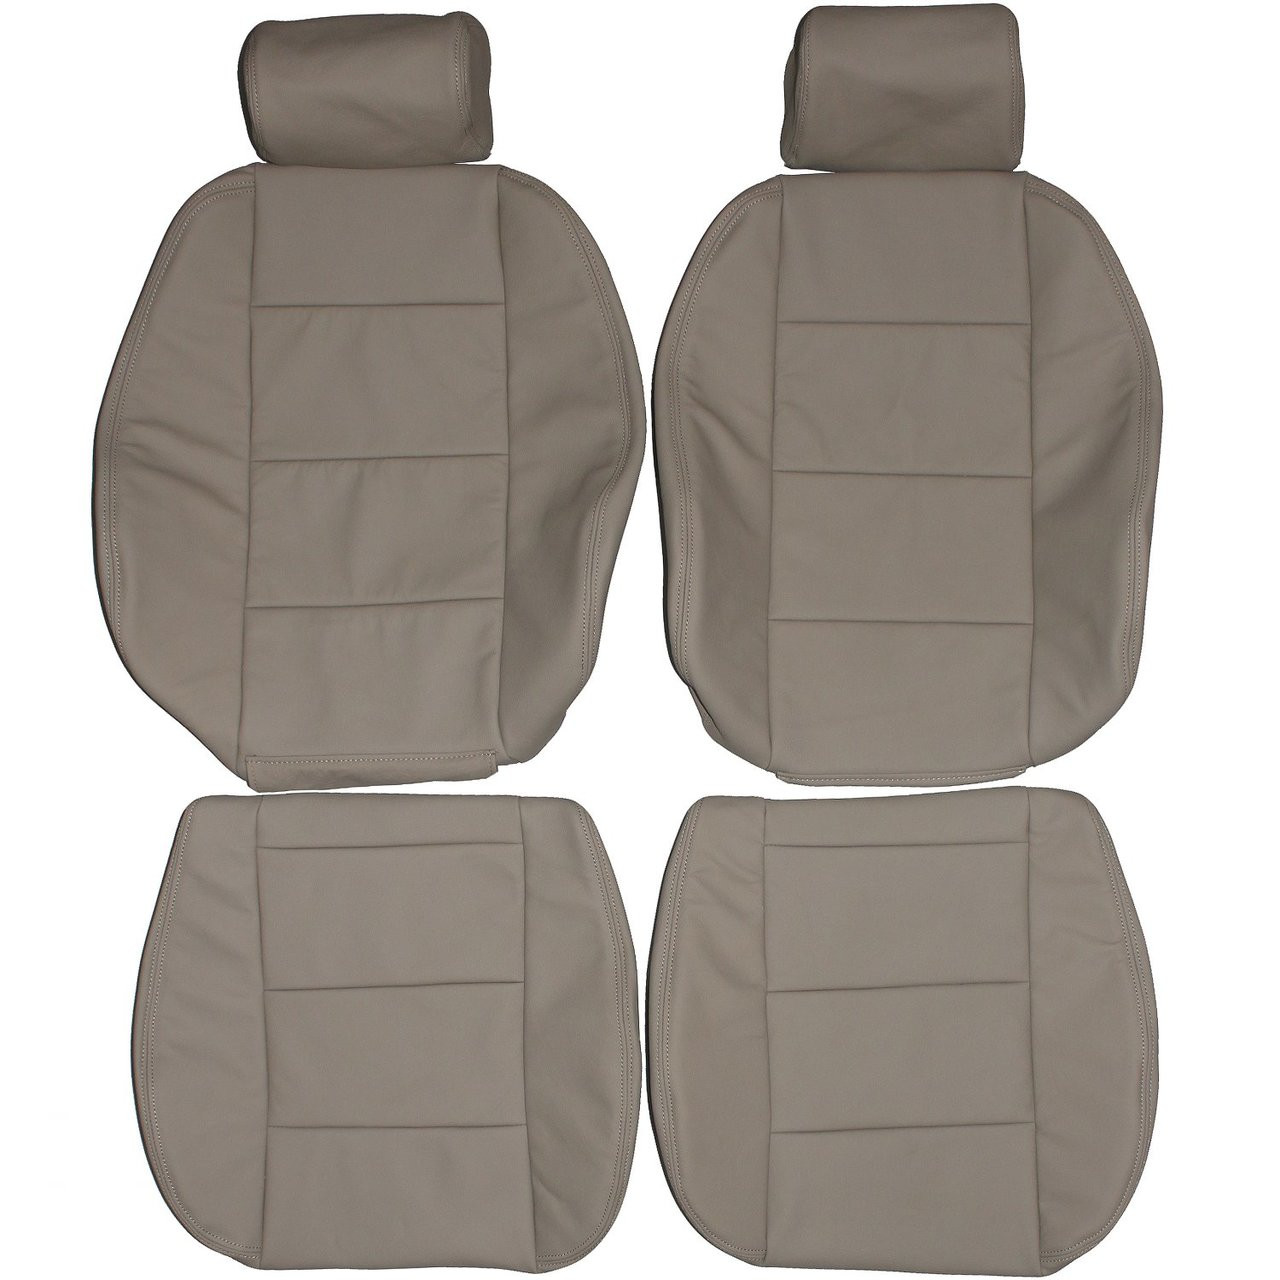 1992-1998 BMW E36 Coupe Sedan Standard Custom Real Leather Seat Covers  (Front) - Lseat.com